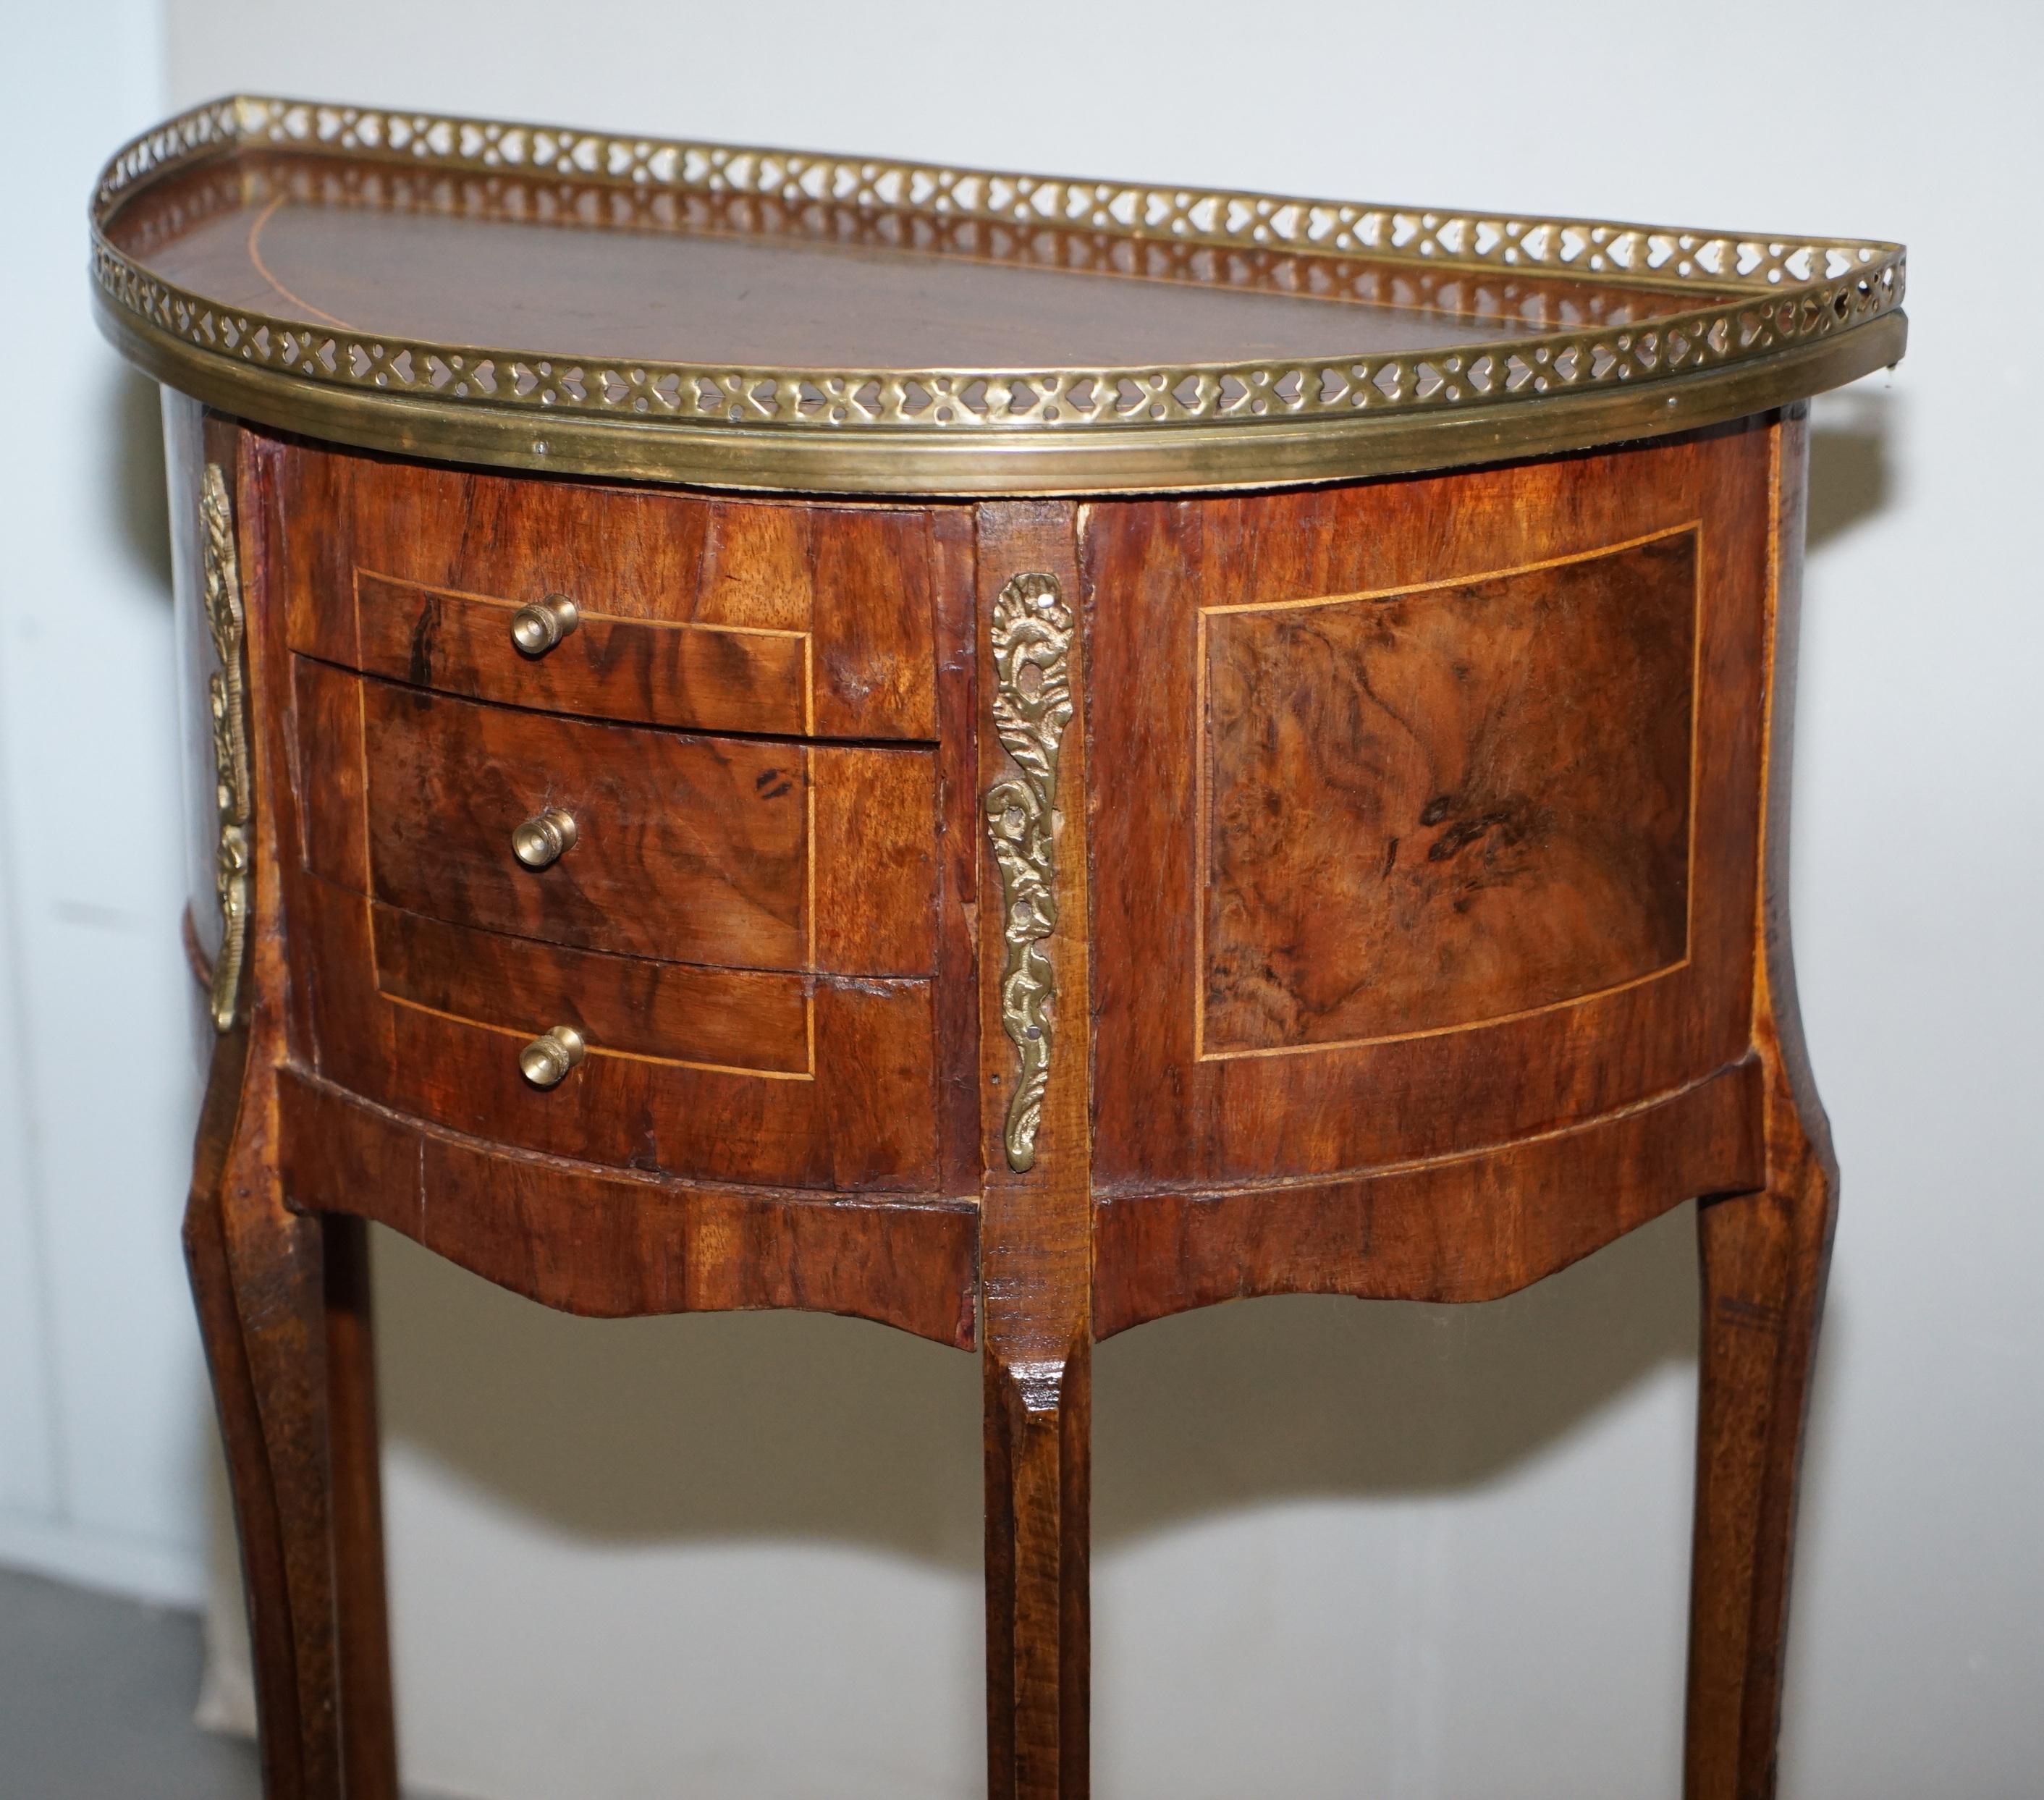 Pair of circa 1900 French Burr Walnut Brass Gallery Rail Demilune Side Tables 1